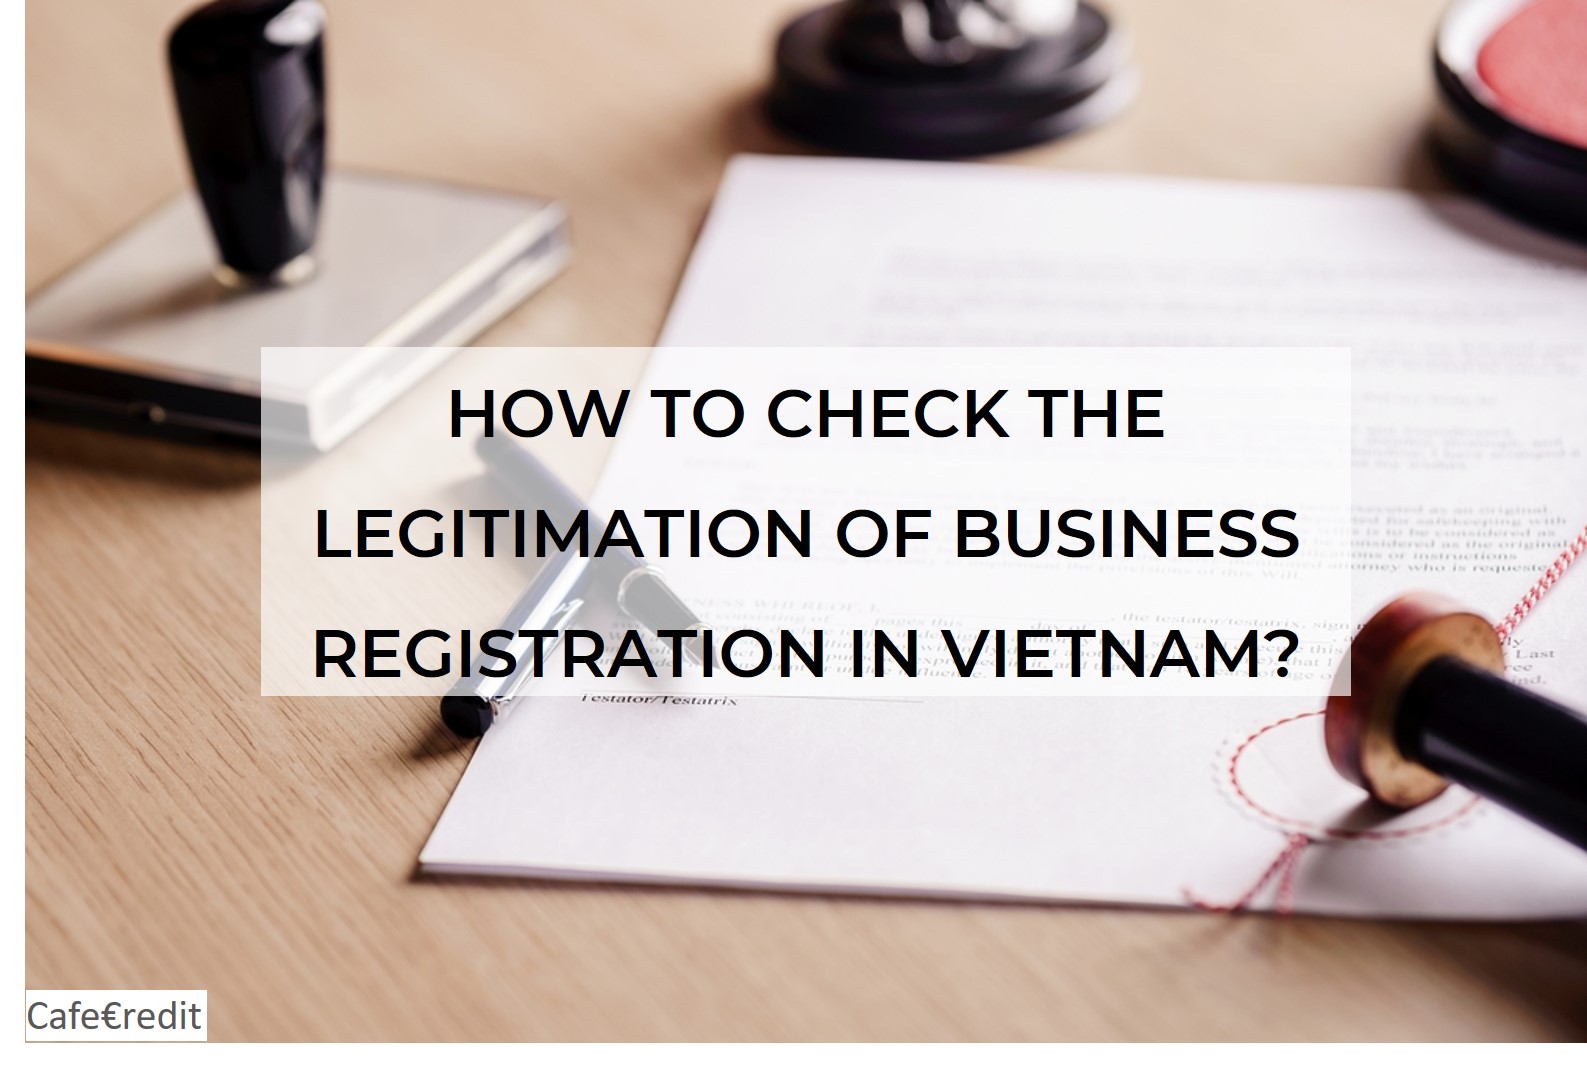 How To Check The Legitimation Of Business Registration In Vietnam?